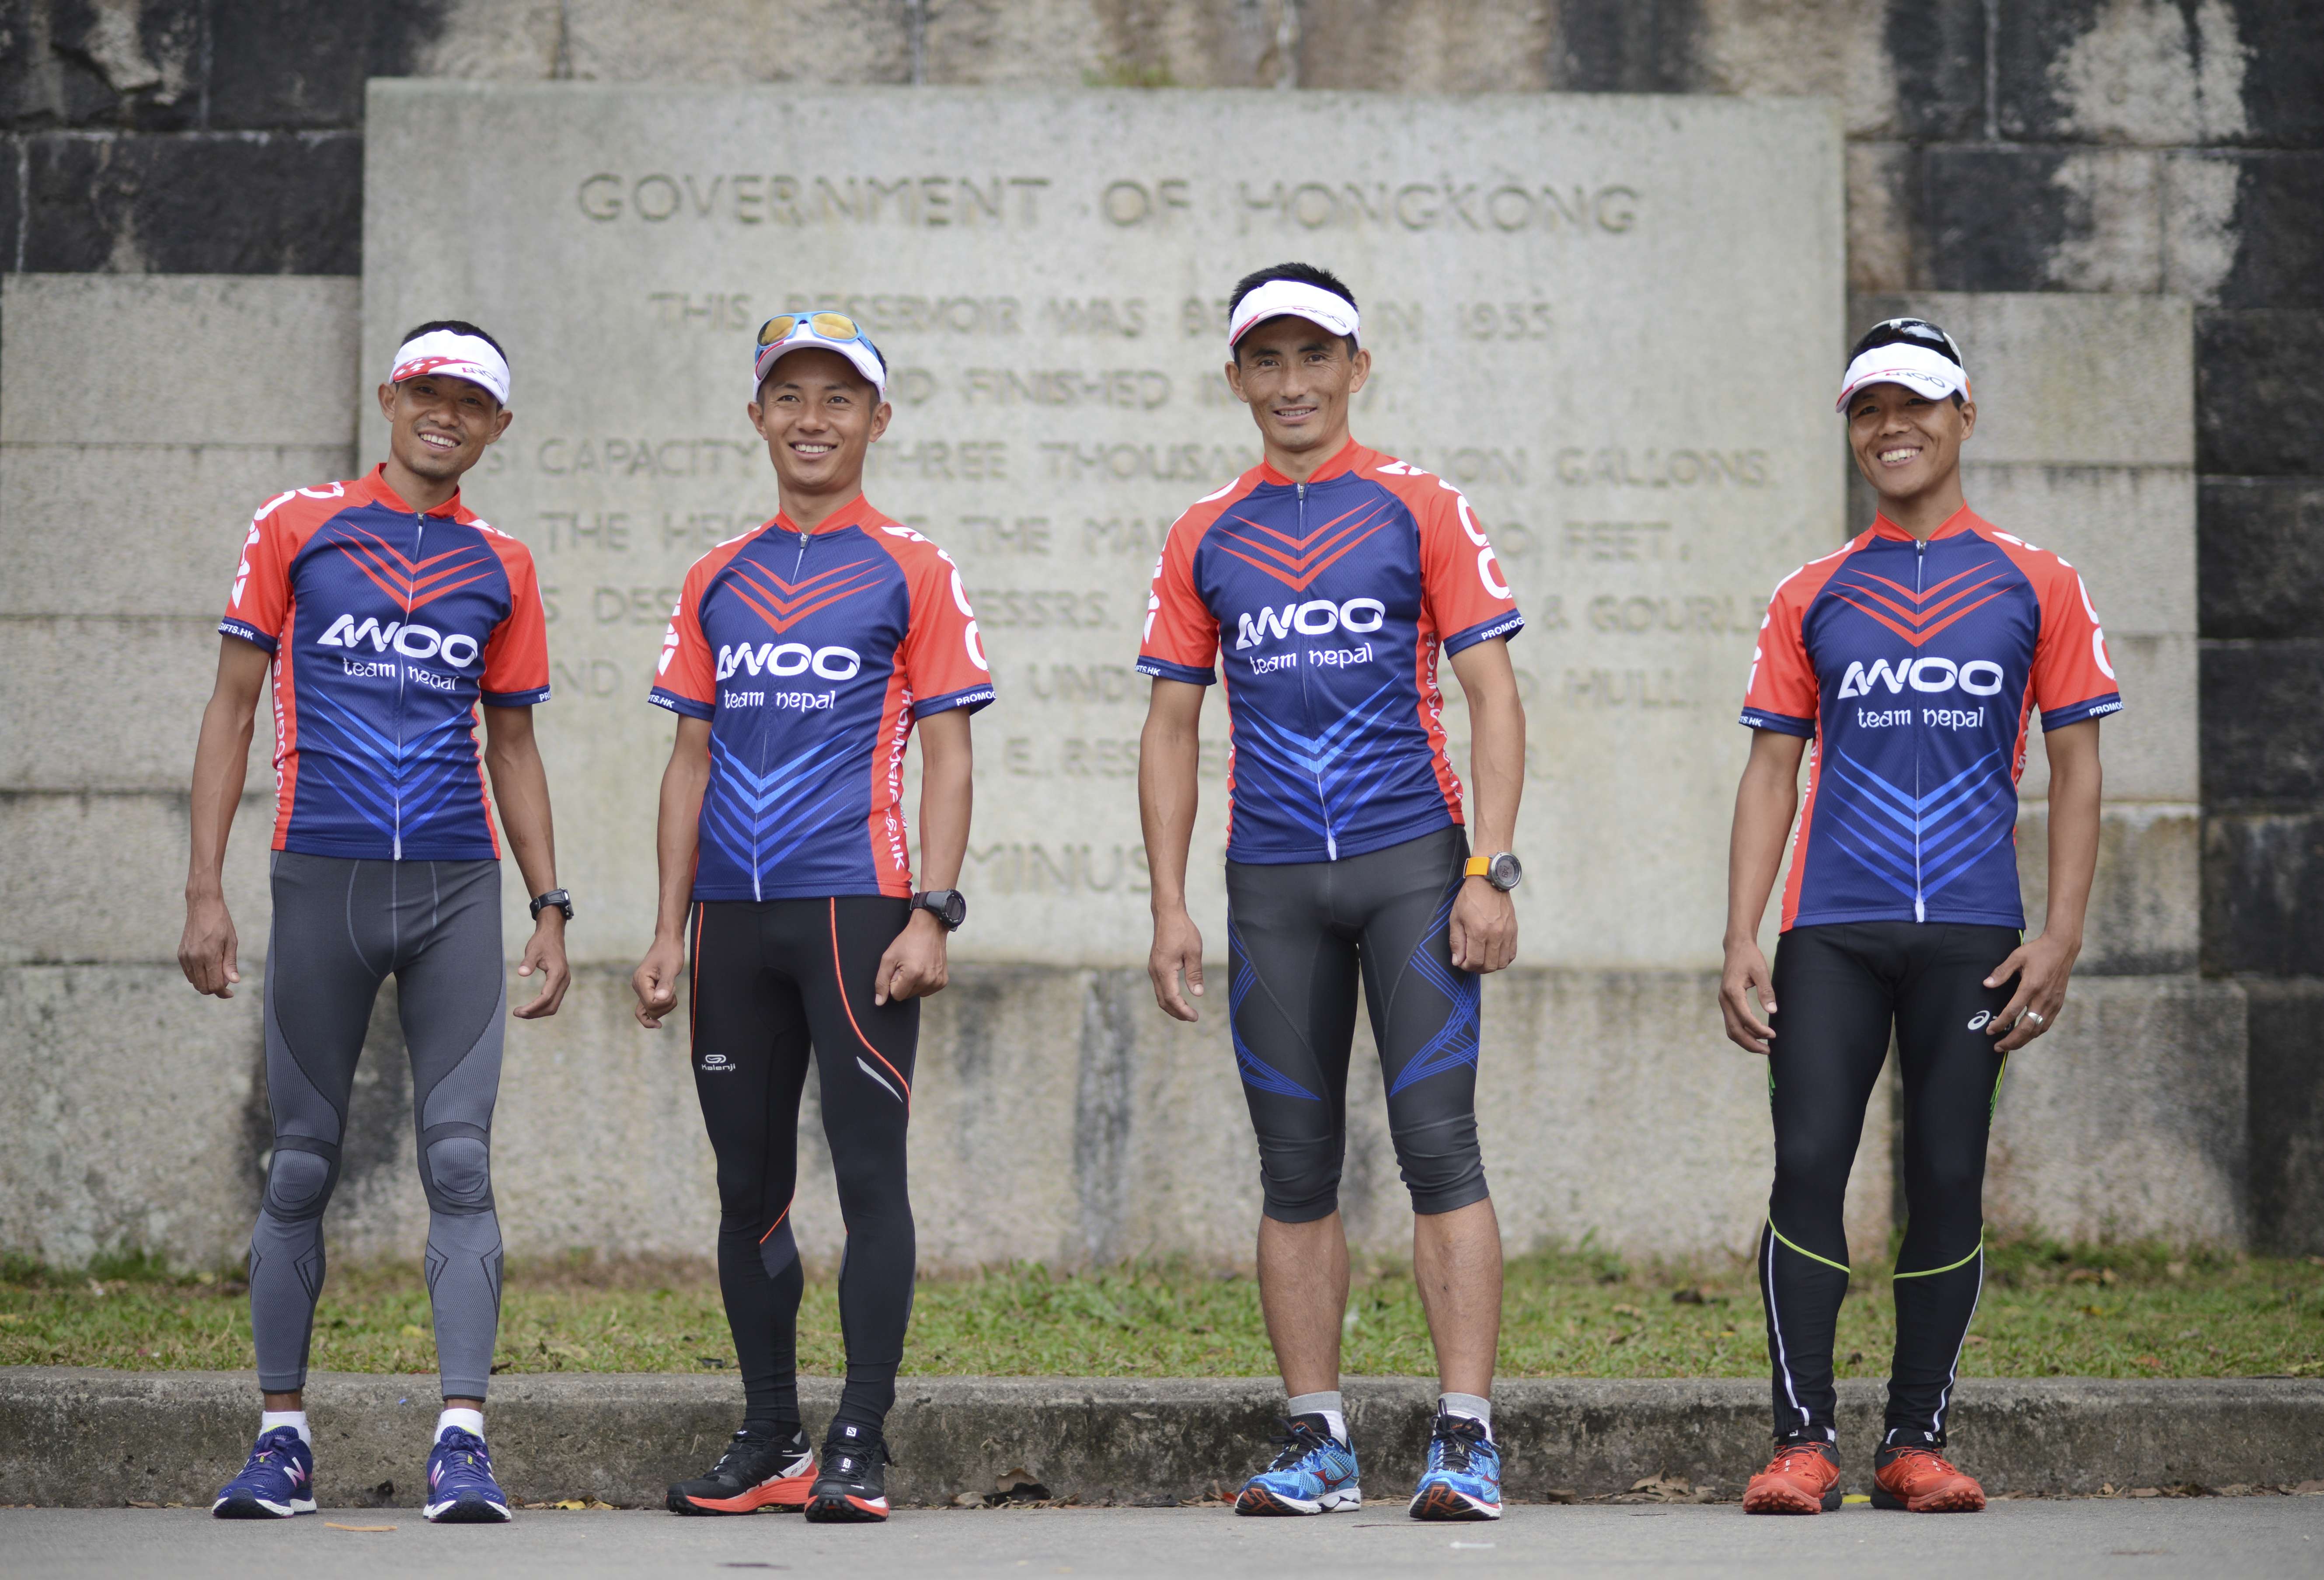 AWOO Team Nepal, who are competing in Oxfam Trailwalker 2016, at the Shing Mun reservoir. Photo: Antony Dickson